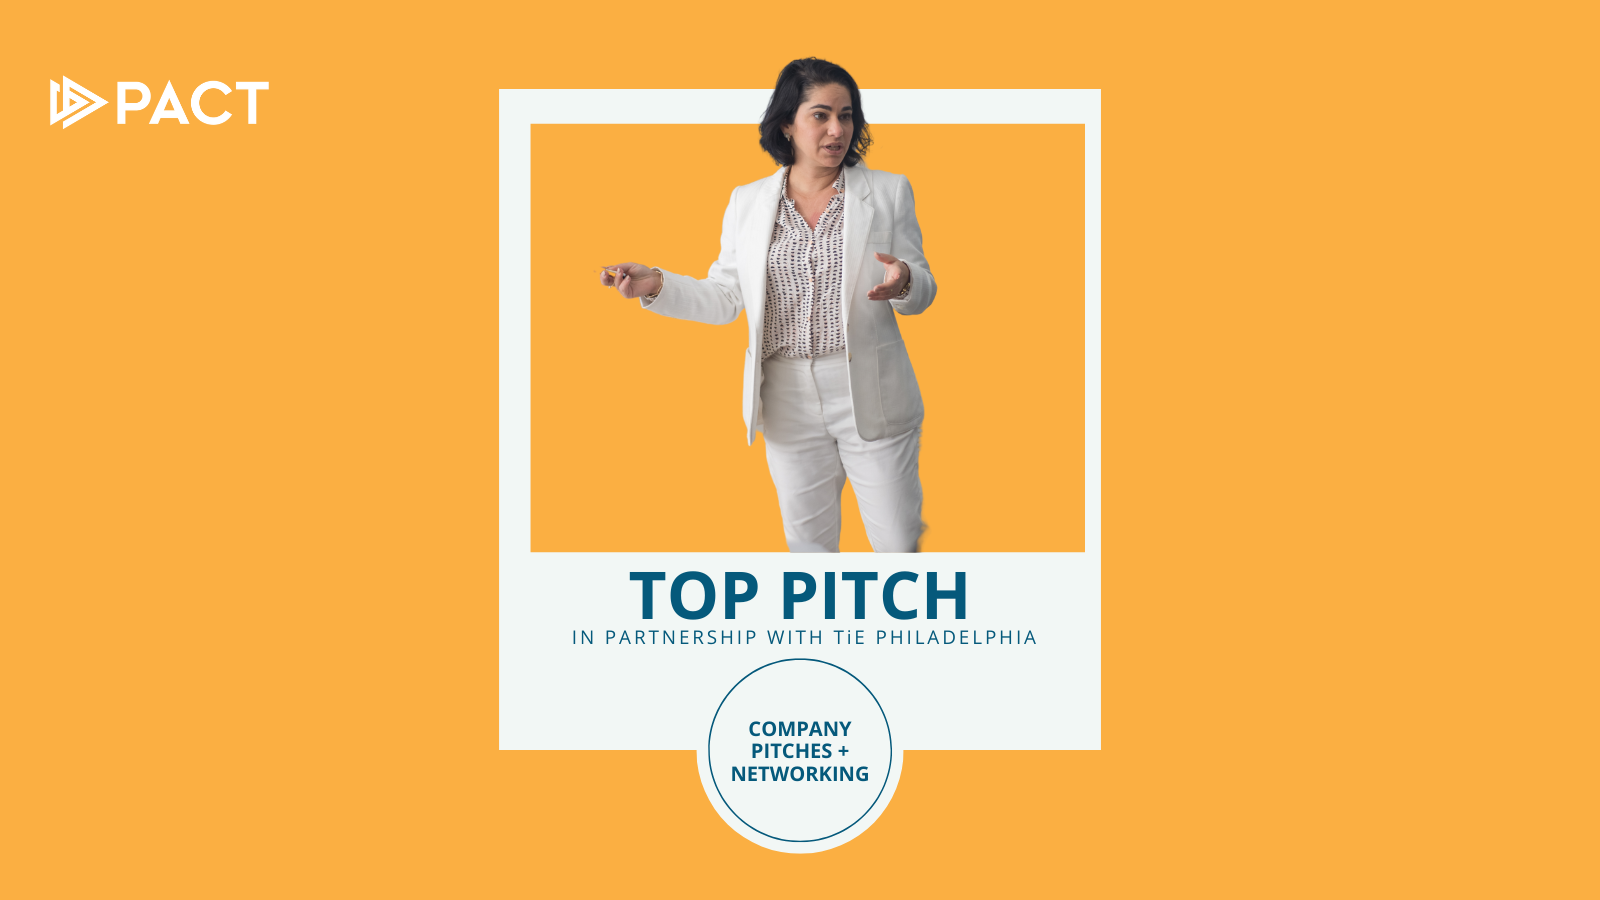 Shares the logo of the Top Pitch series in collaboration with Comcast Lift Labs and TiE Philadelphia